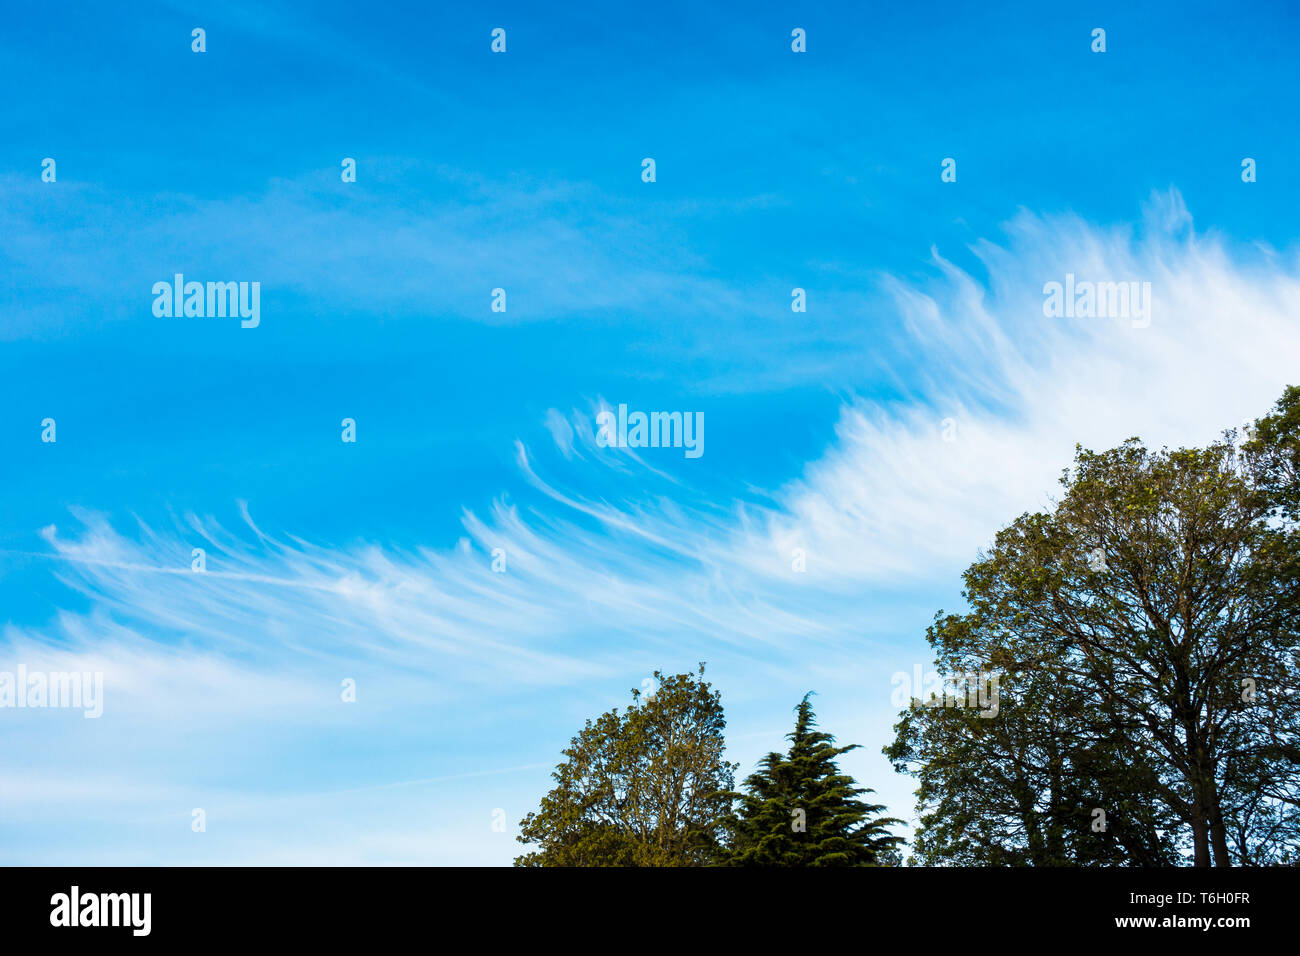 Unusual, strange cloud formation over a blue sky with chemtrails, contrails and trees. Stock Photo